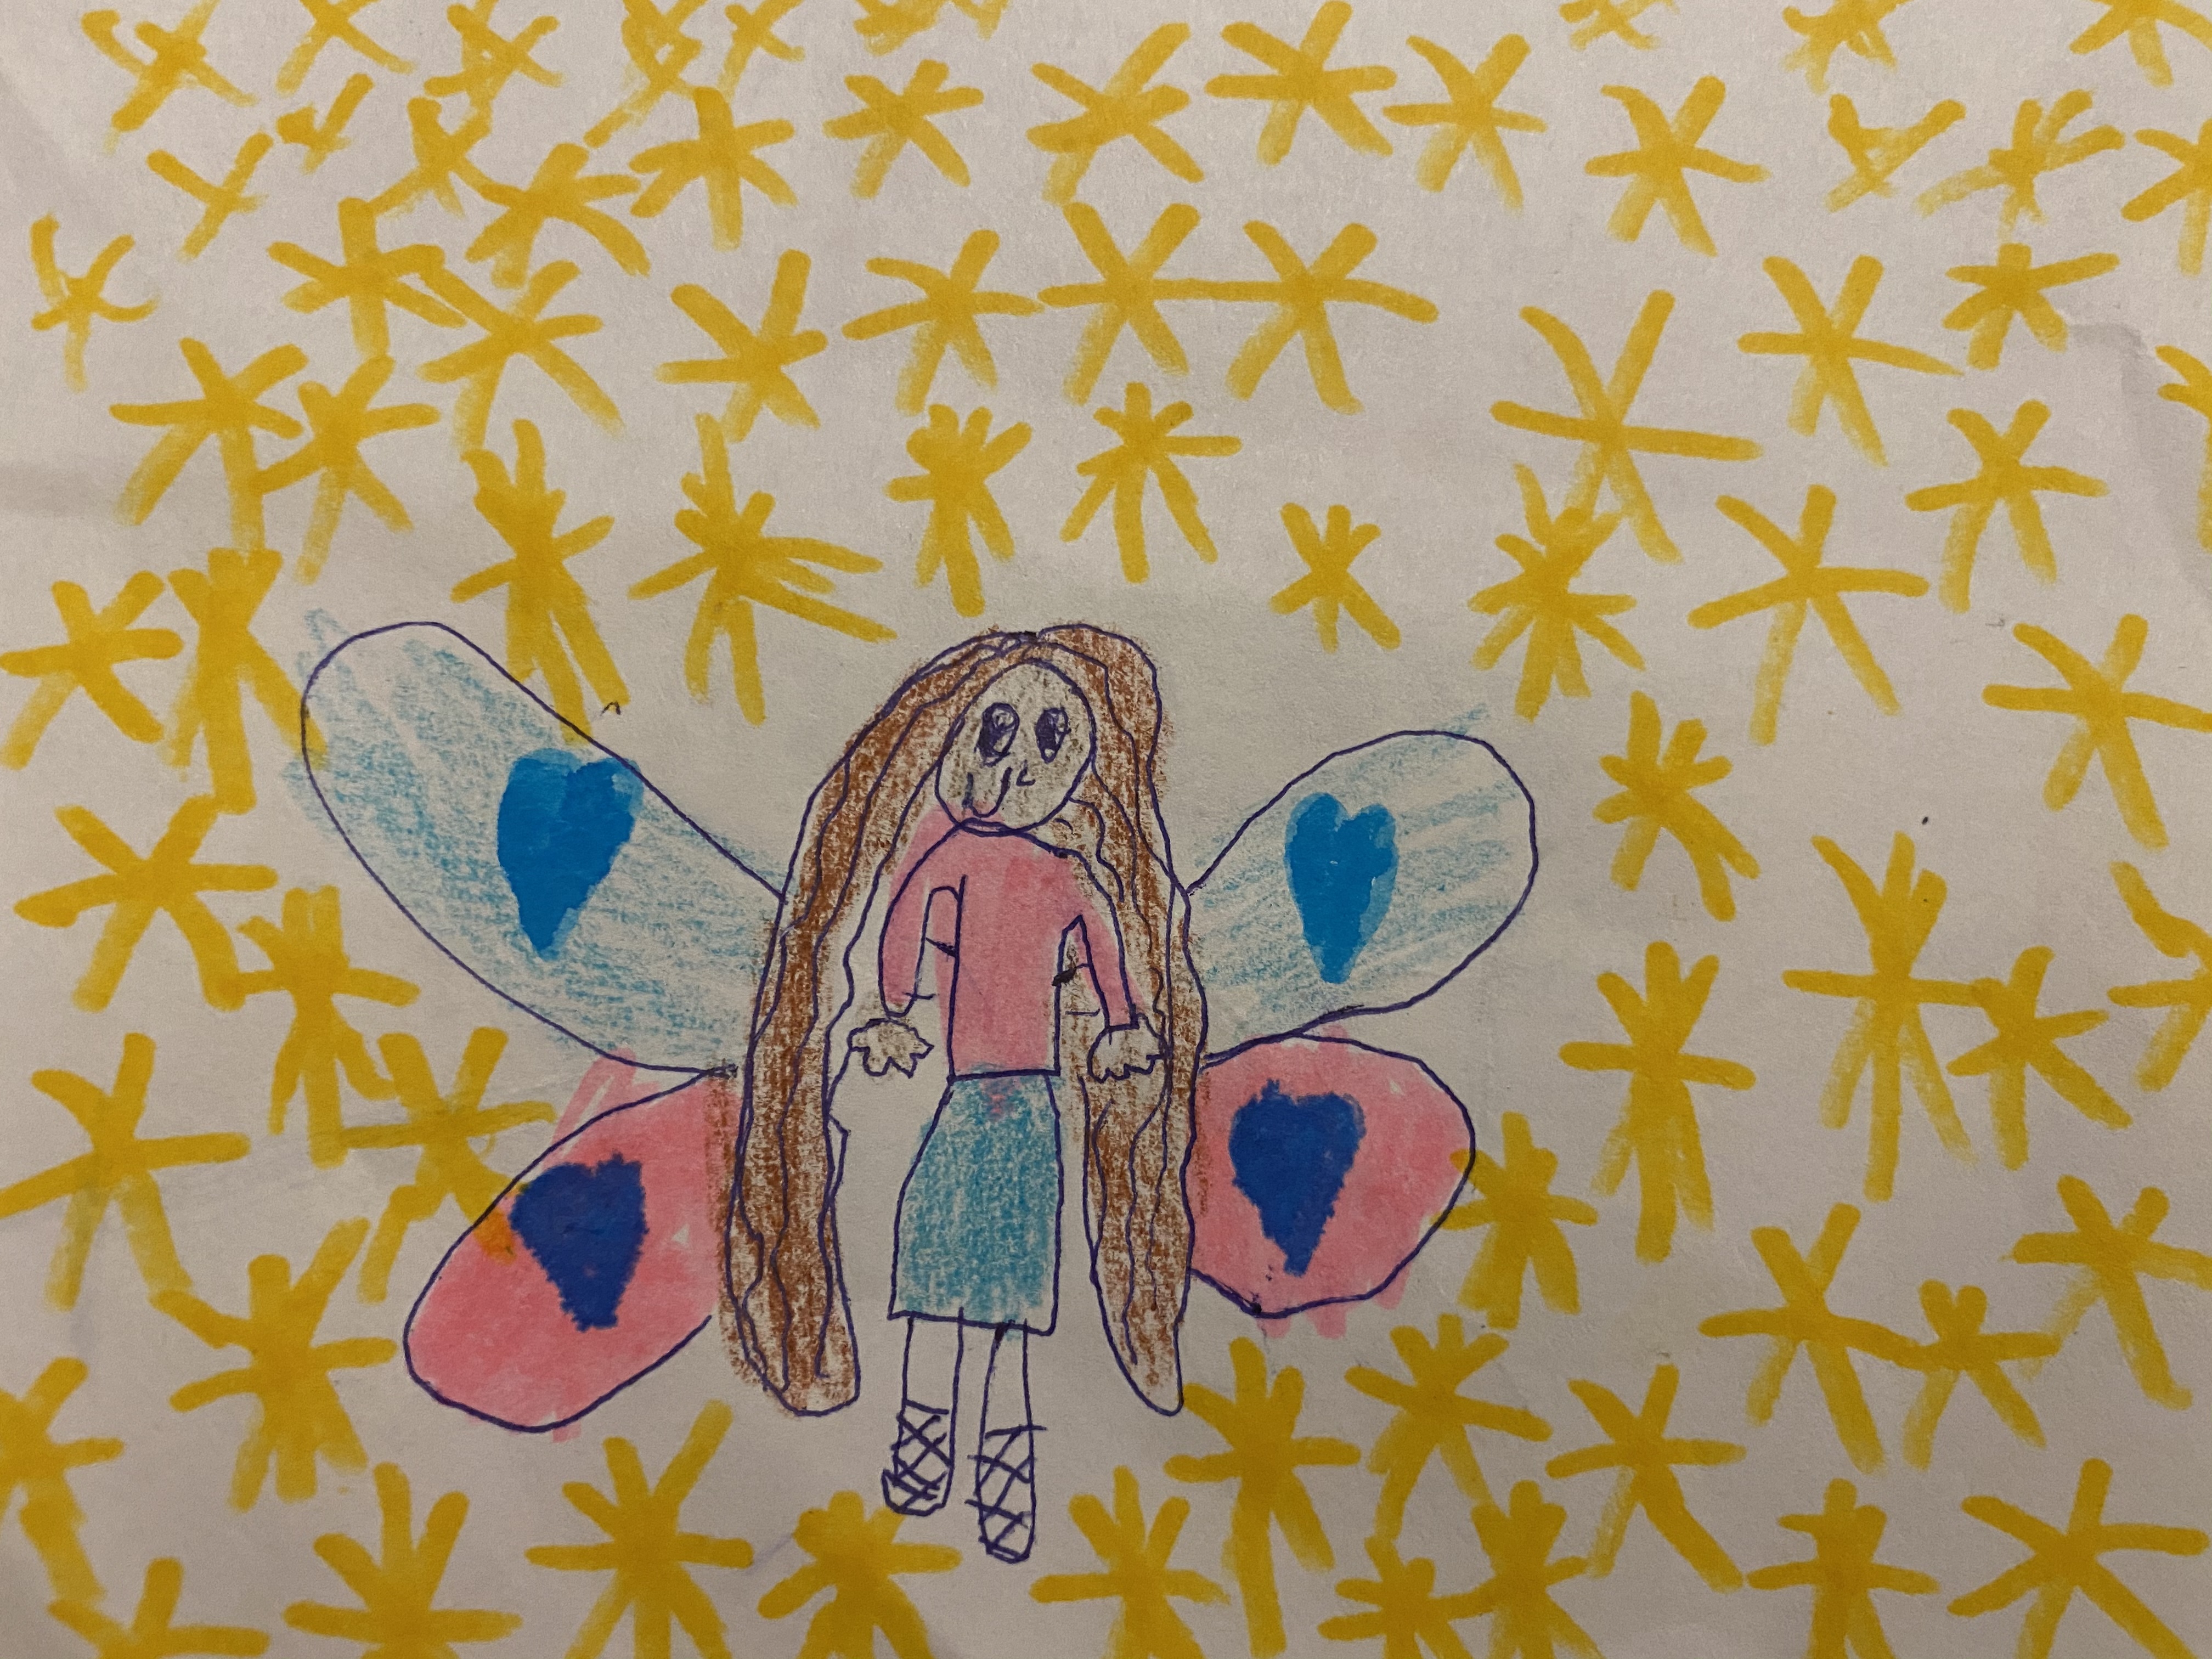 'Happiness' by Ruby (6) from Kildare